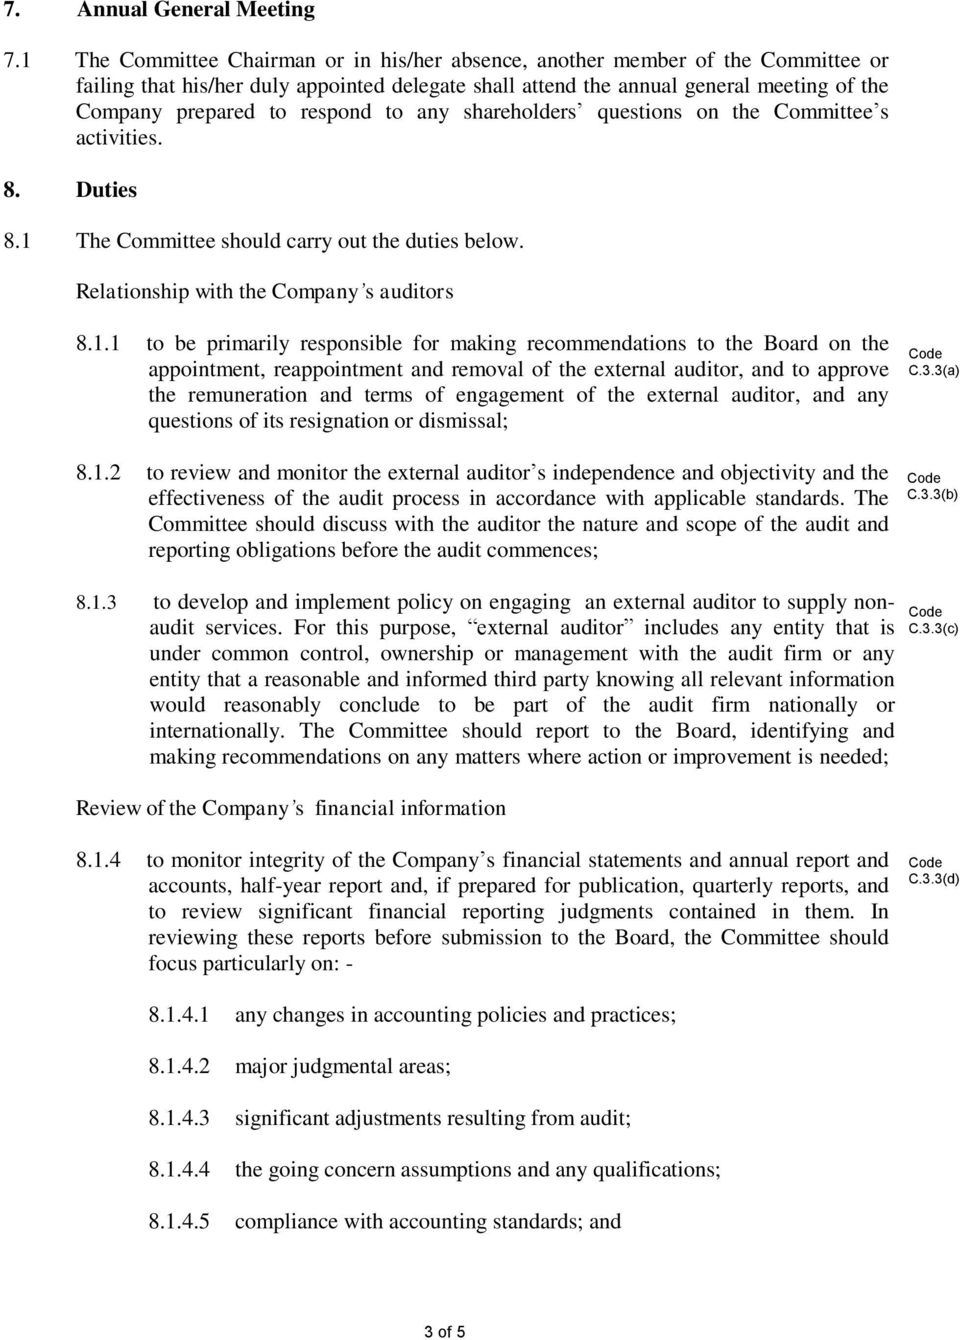 respond to any shareholders questions on the Committee s activities. 8. Duties 8.1 